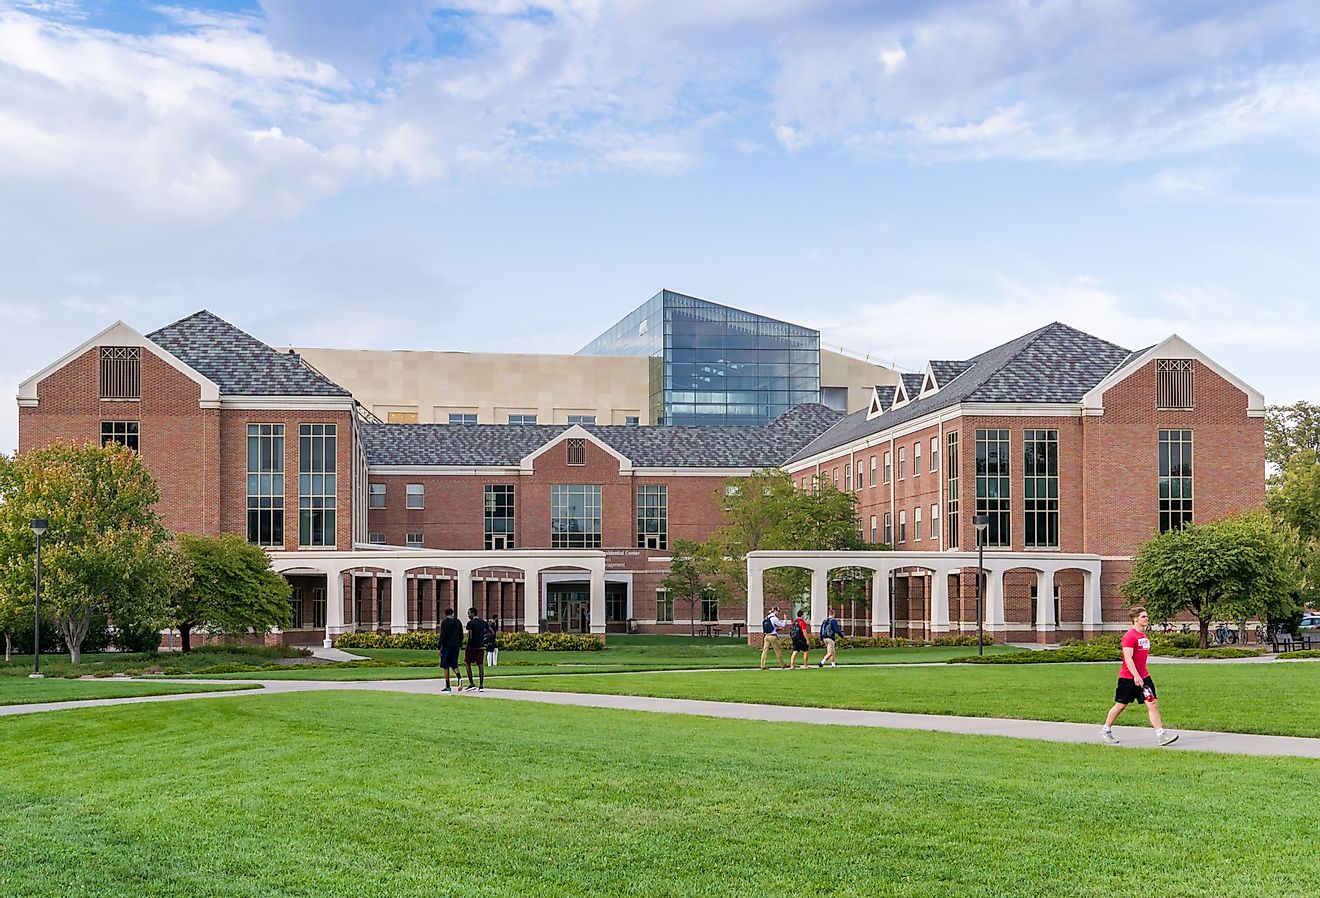 The Esther L. Kauffman Academic Residential Center on the campus of the University of Nebraska. Image credit Ken Wolter via Shutterstock.